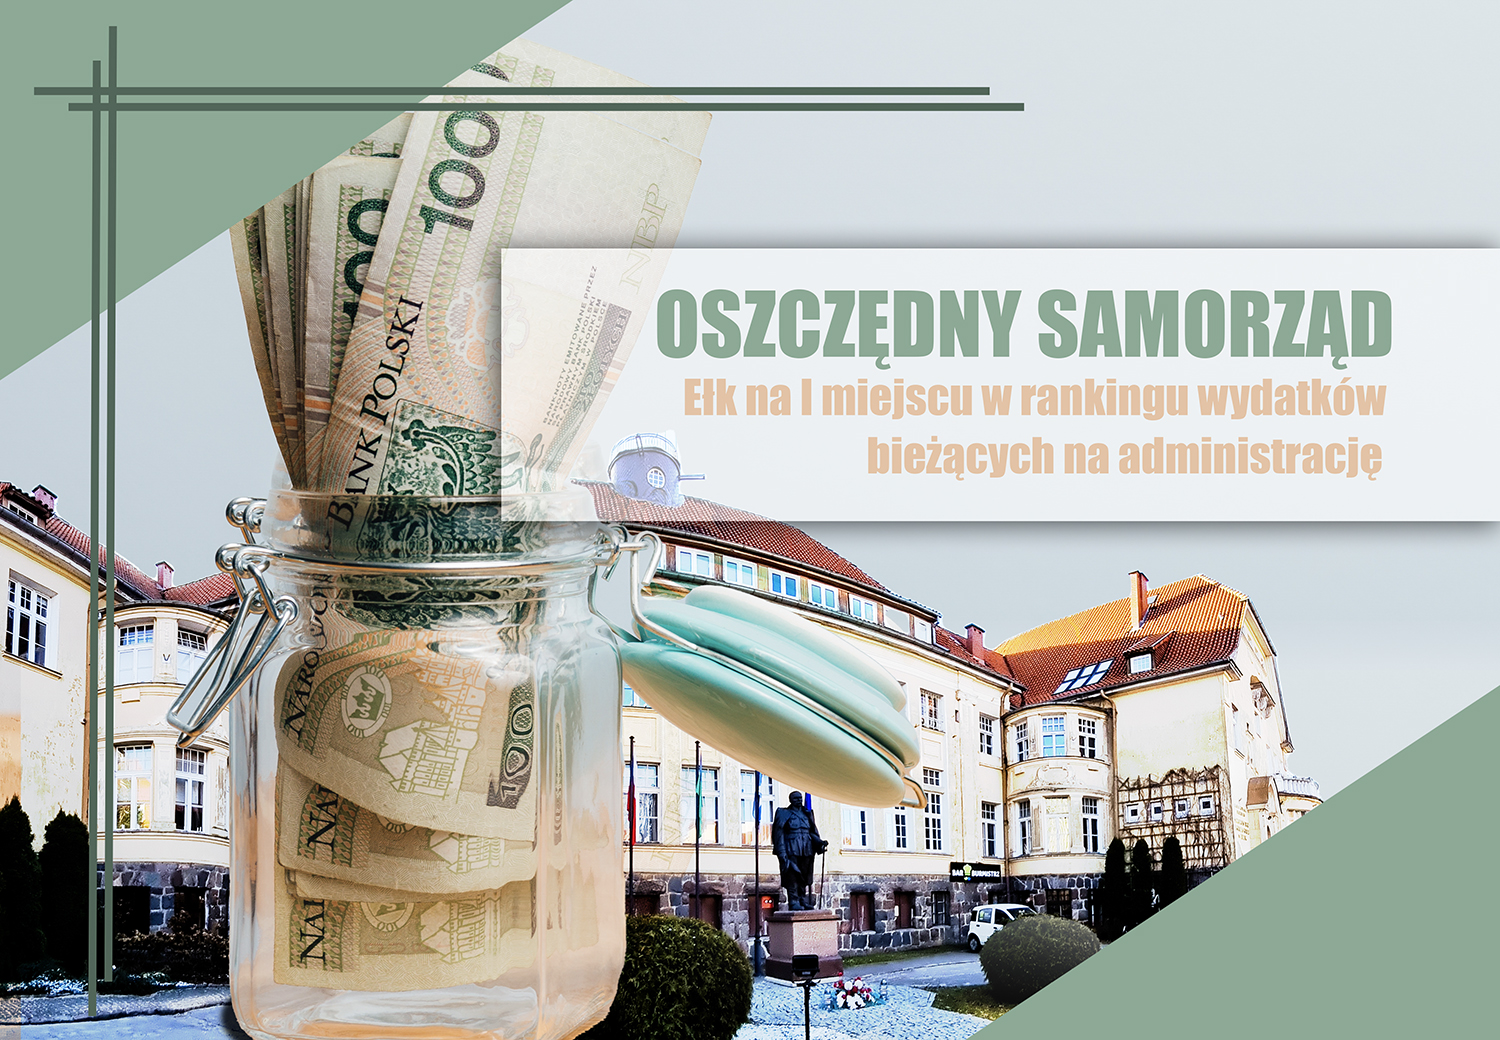 Economical local government – Ełk on the first place in the ranking of current expenditure on administration